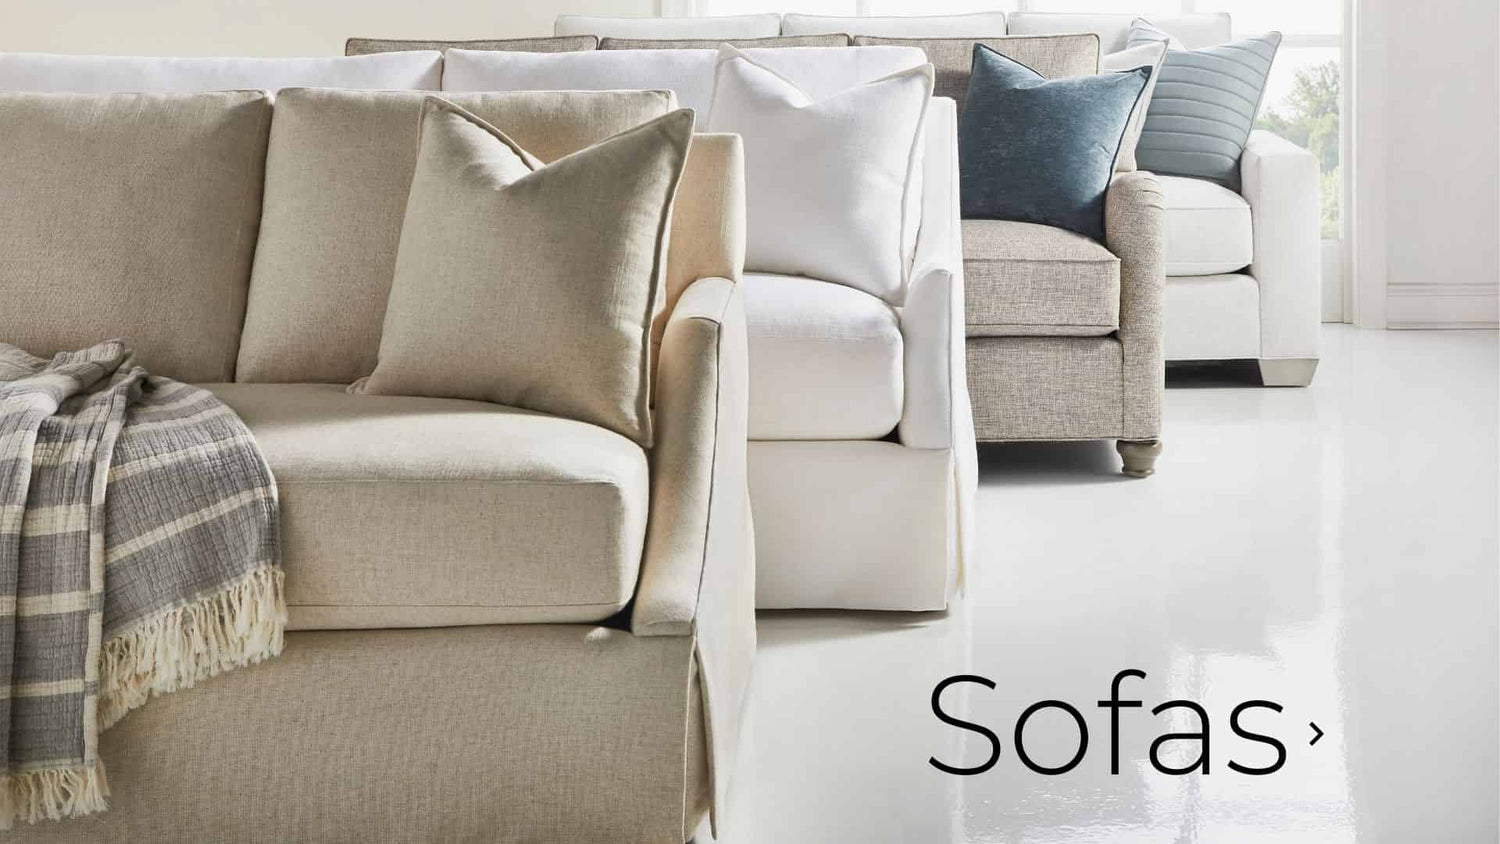 Four vanguard sofas in a white room. Links to sofas page